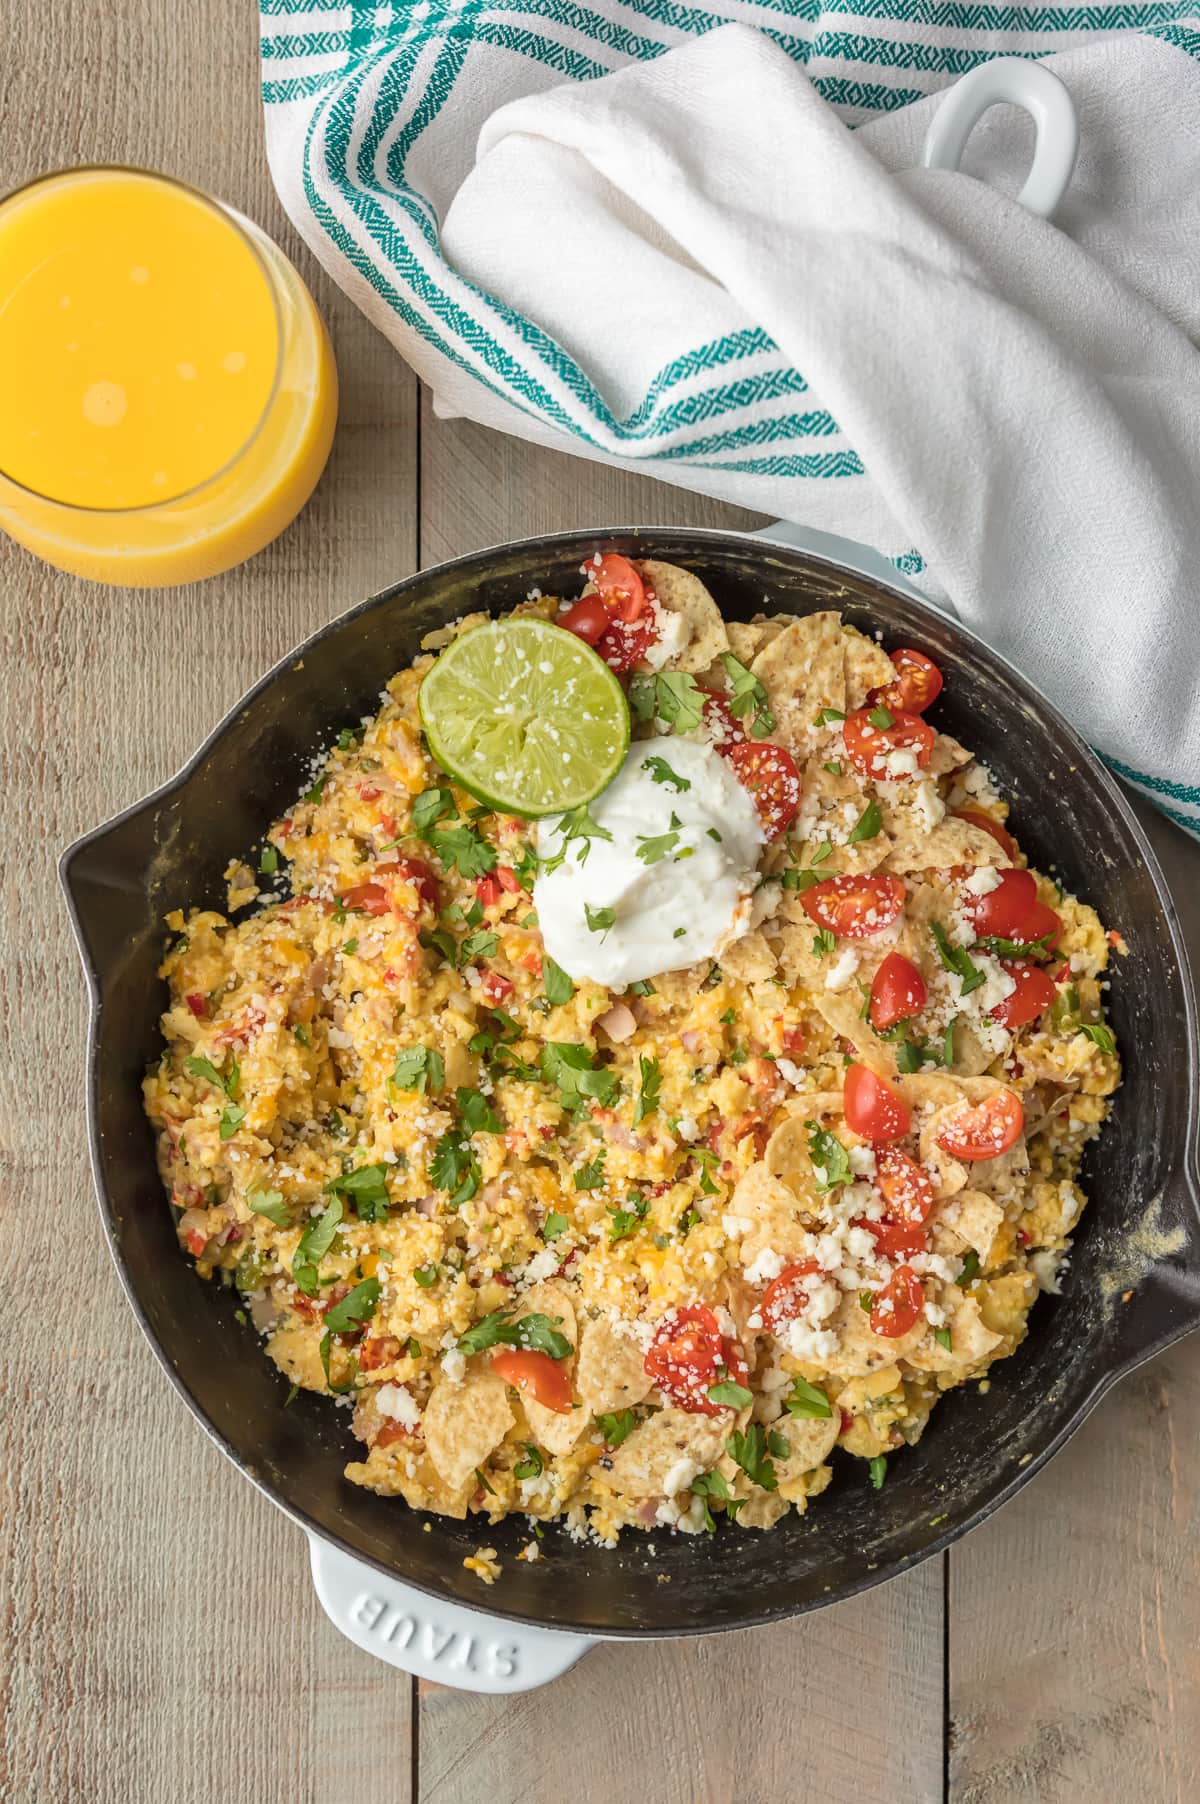 Tex Mex Migas recipe in a skillet, next to a dish towel and a glass of orange juice